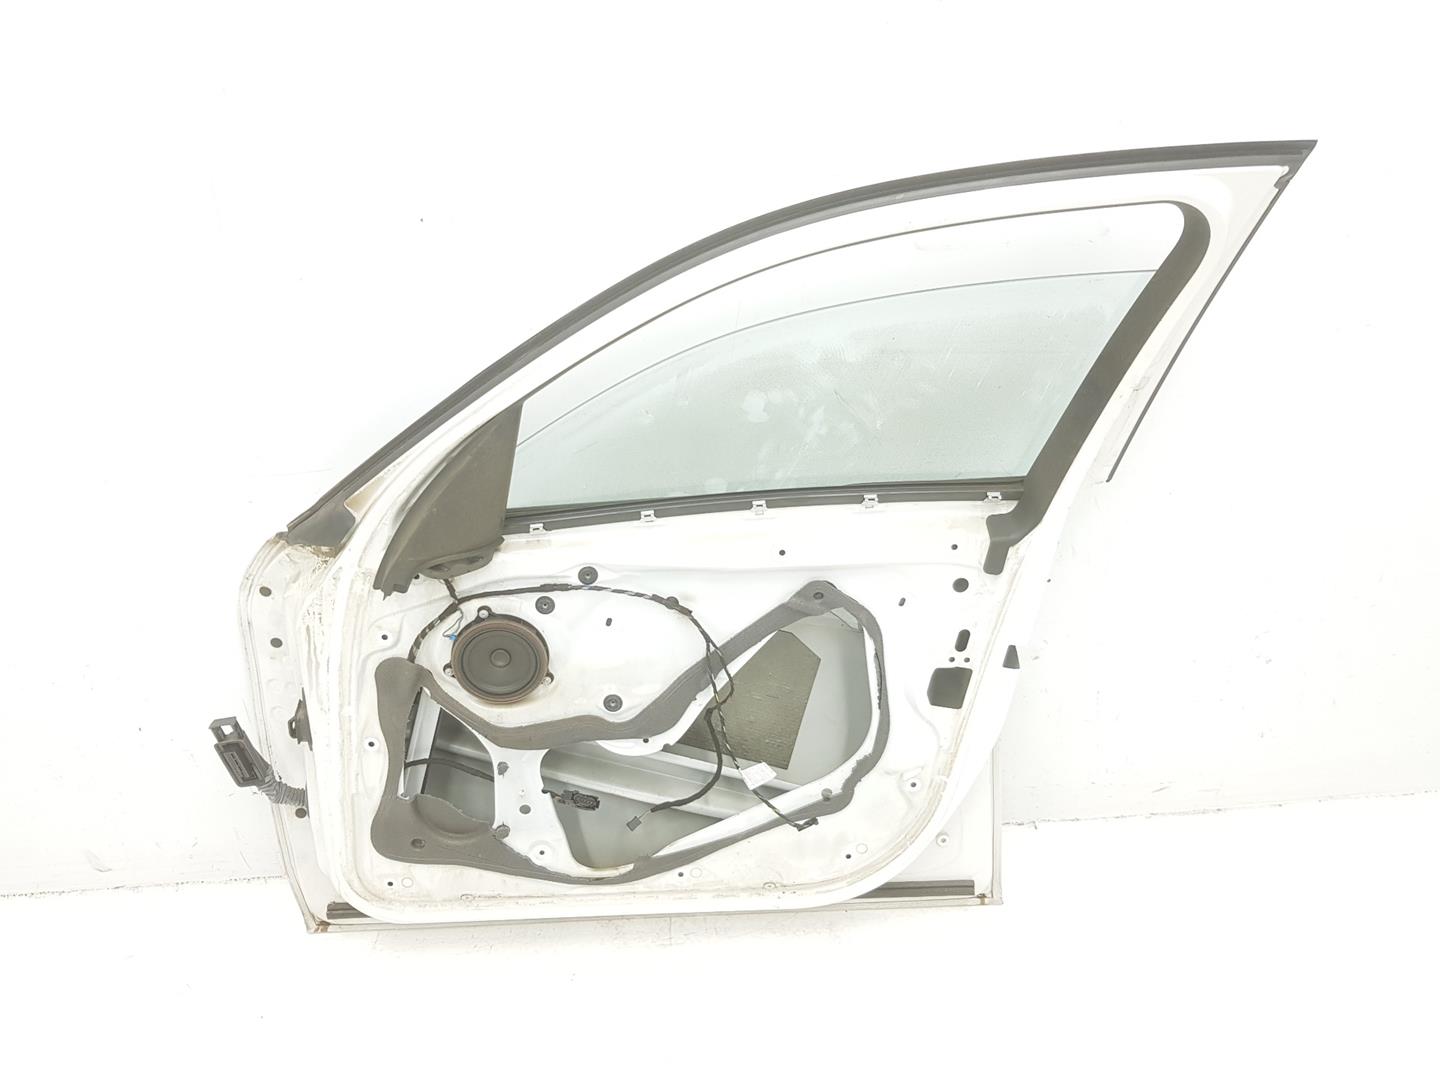 BMW 1 Series F20/F21 (2011-2020) Front Right Door 41009628760, 41009628760, COLORBLANCOALPIN300 23753561